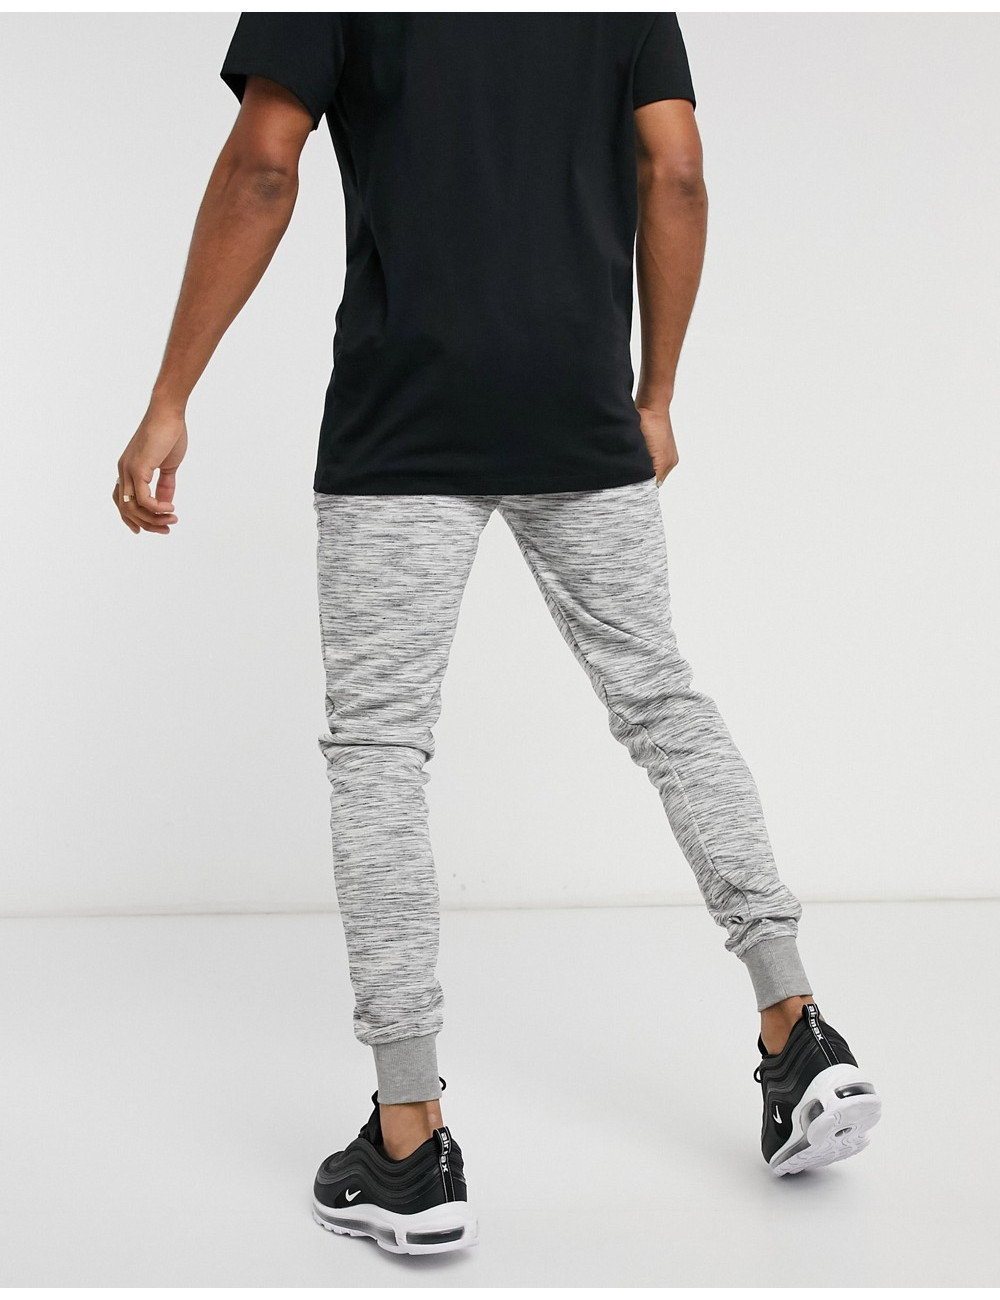 Brave Soul joggers in grey